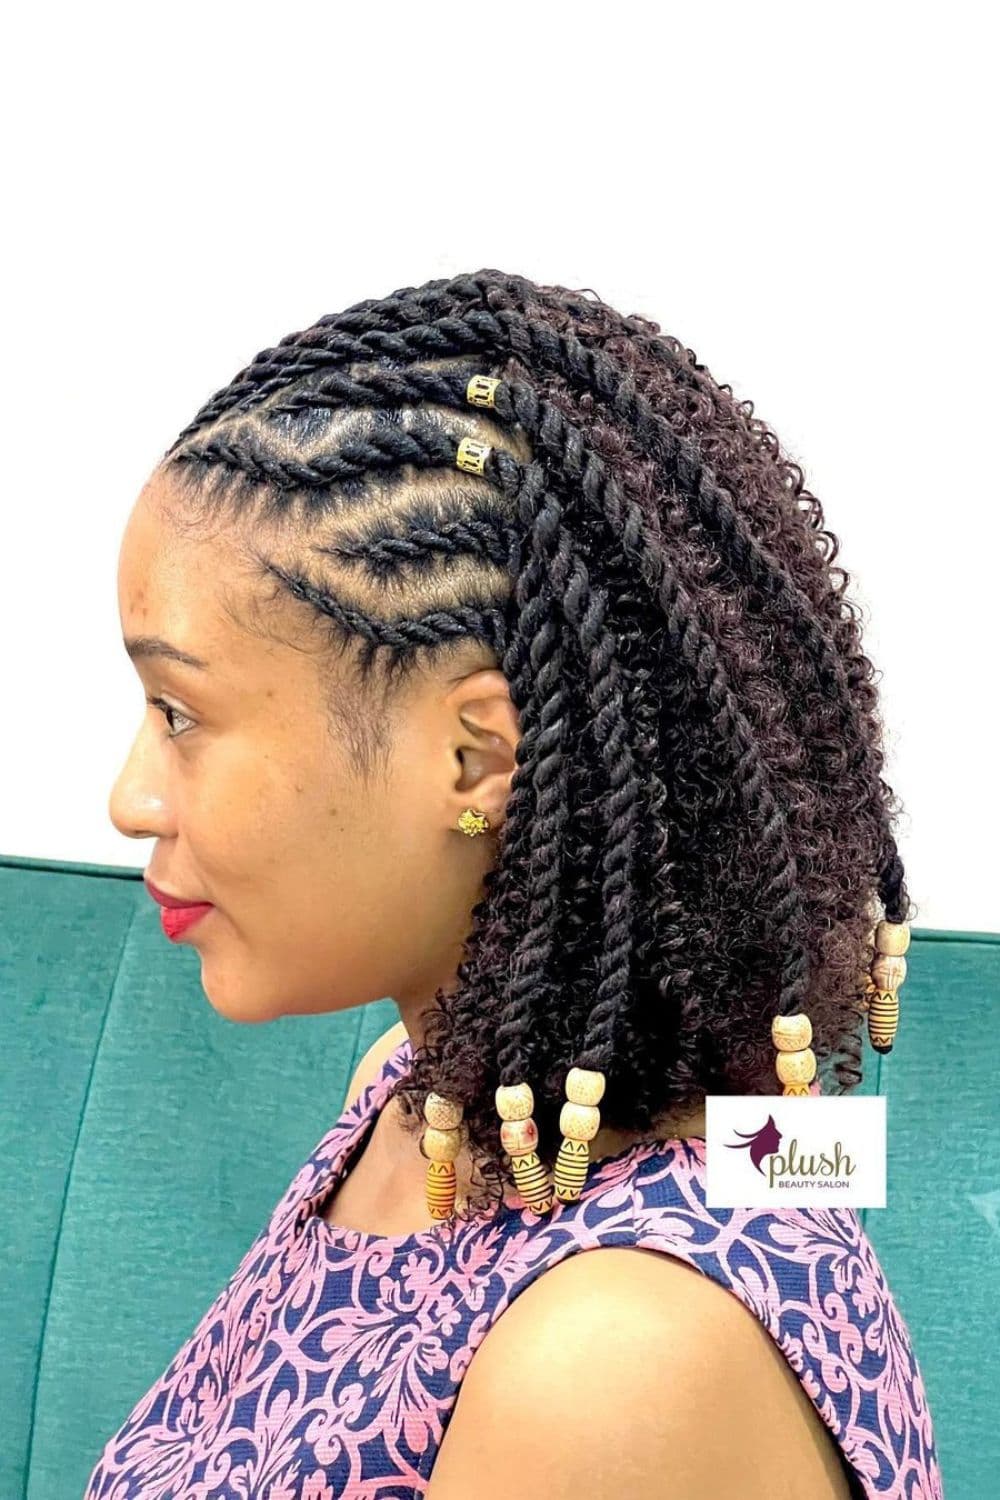 Side view of a woman with black flat twists hairstyle with beads and gold cuffs.